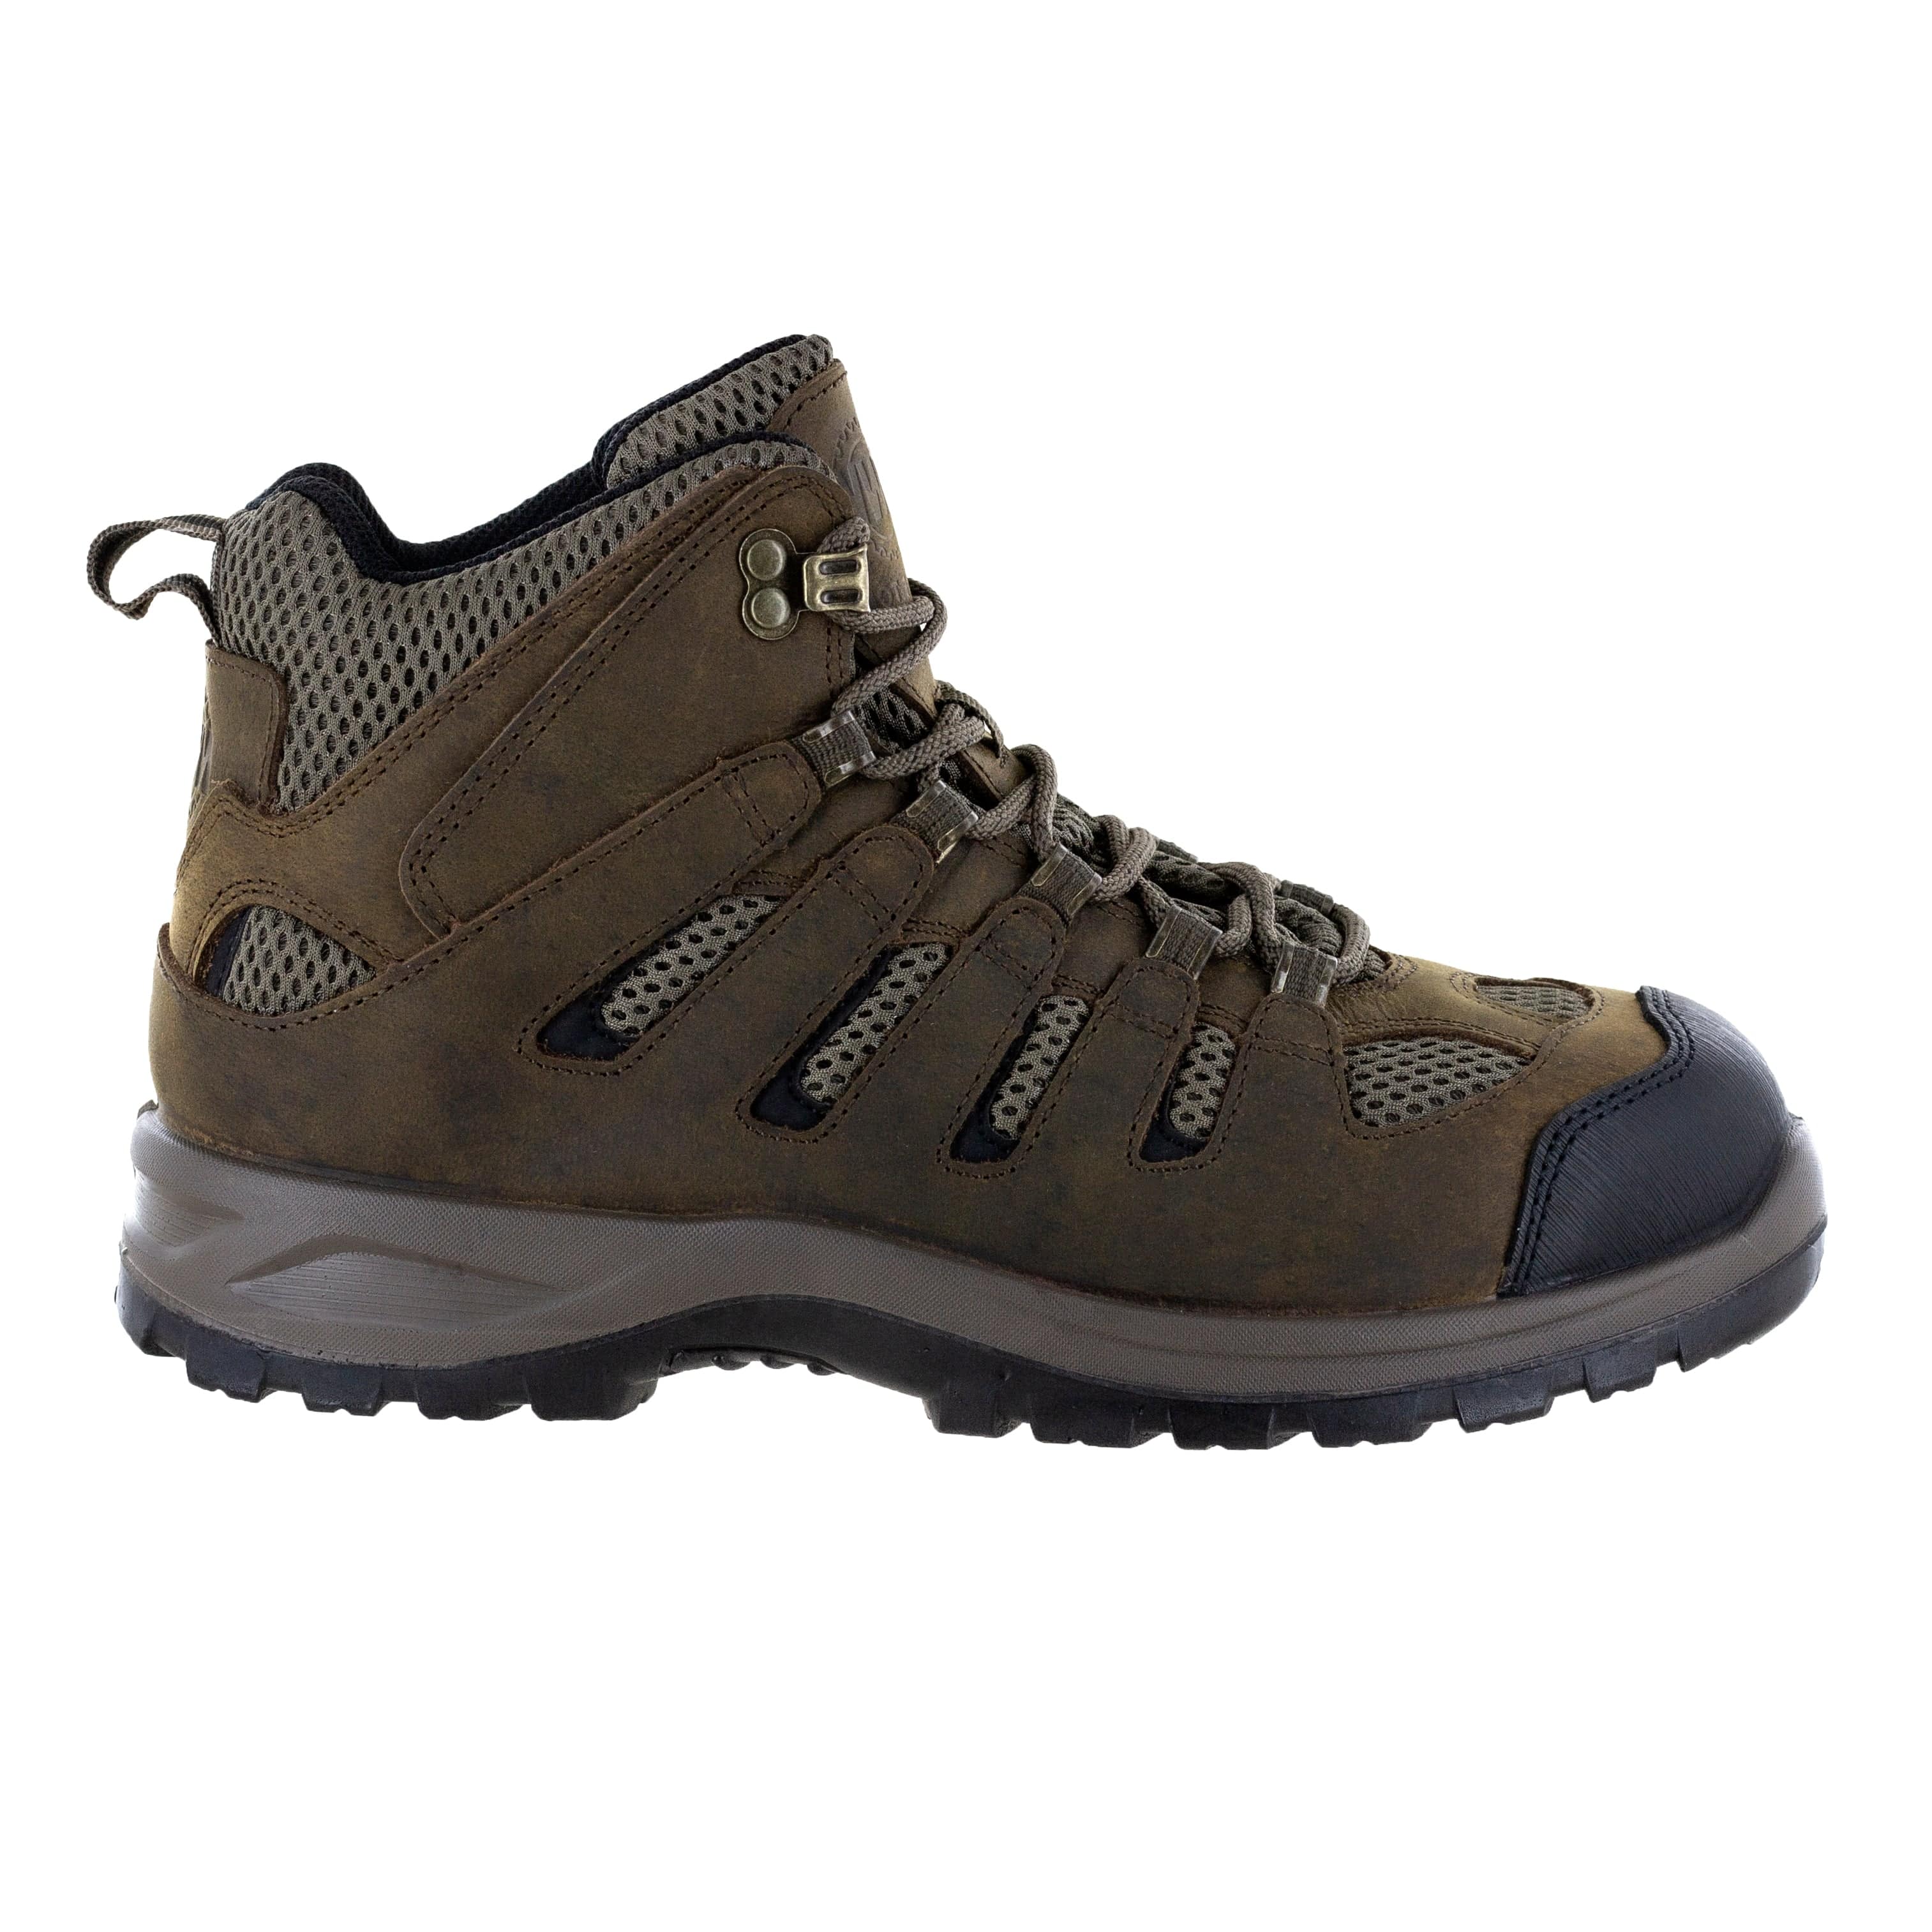 Slip-resistant composite toe work boots for safety on the job